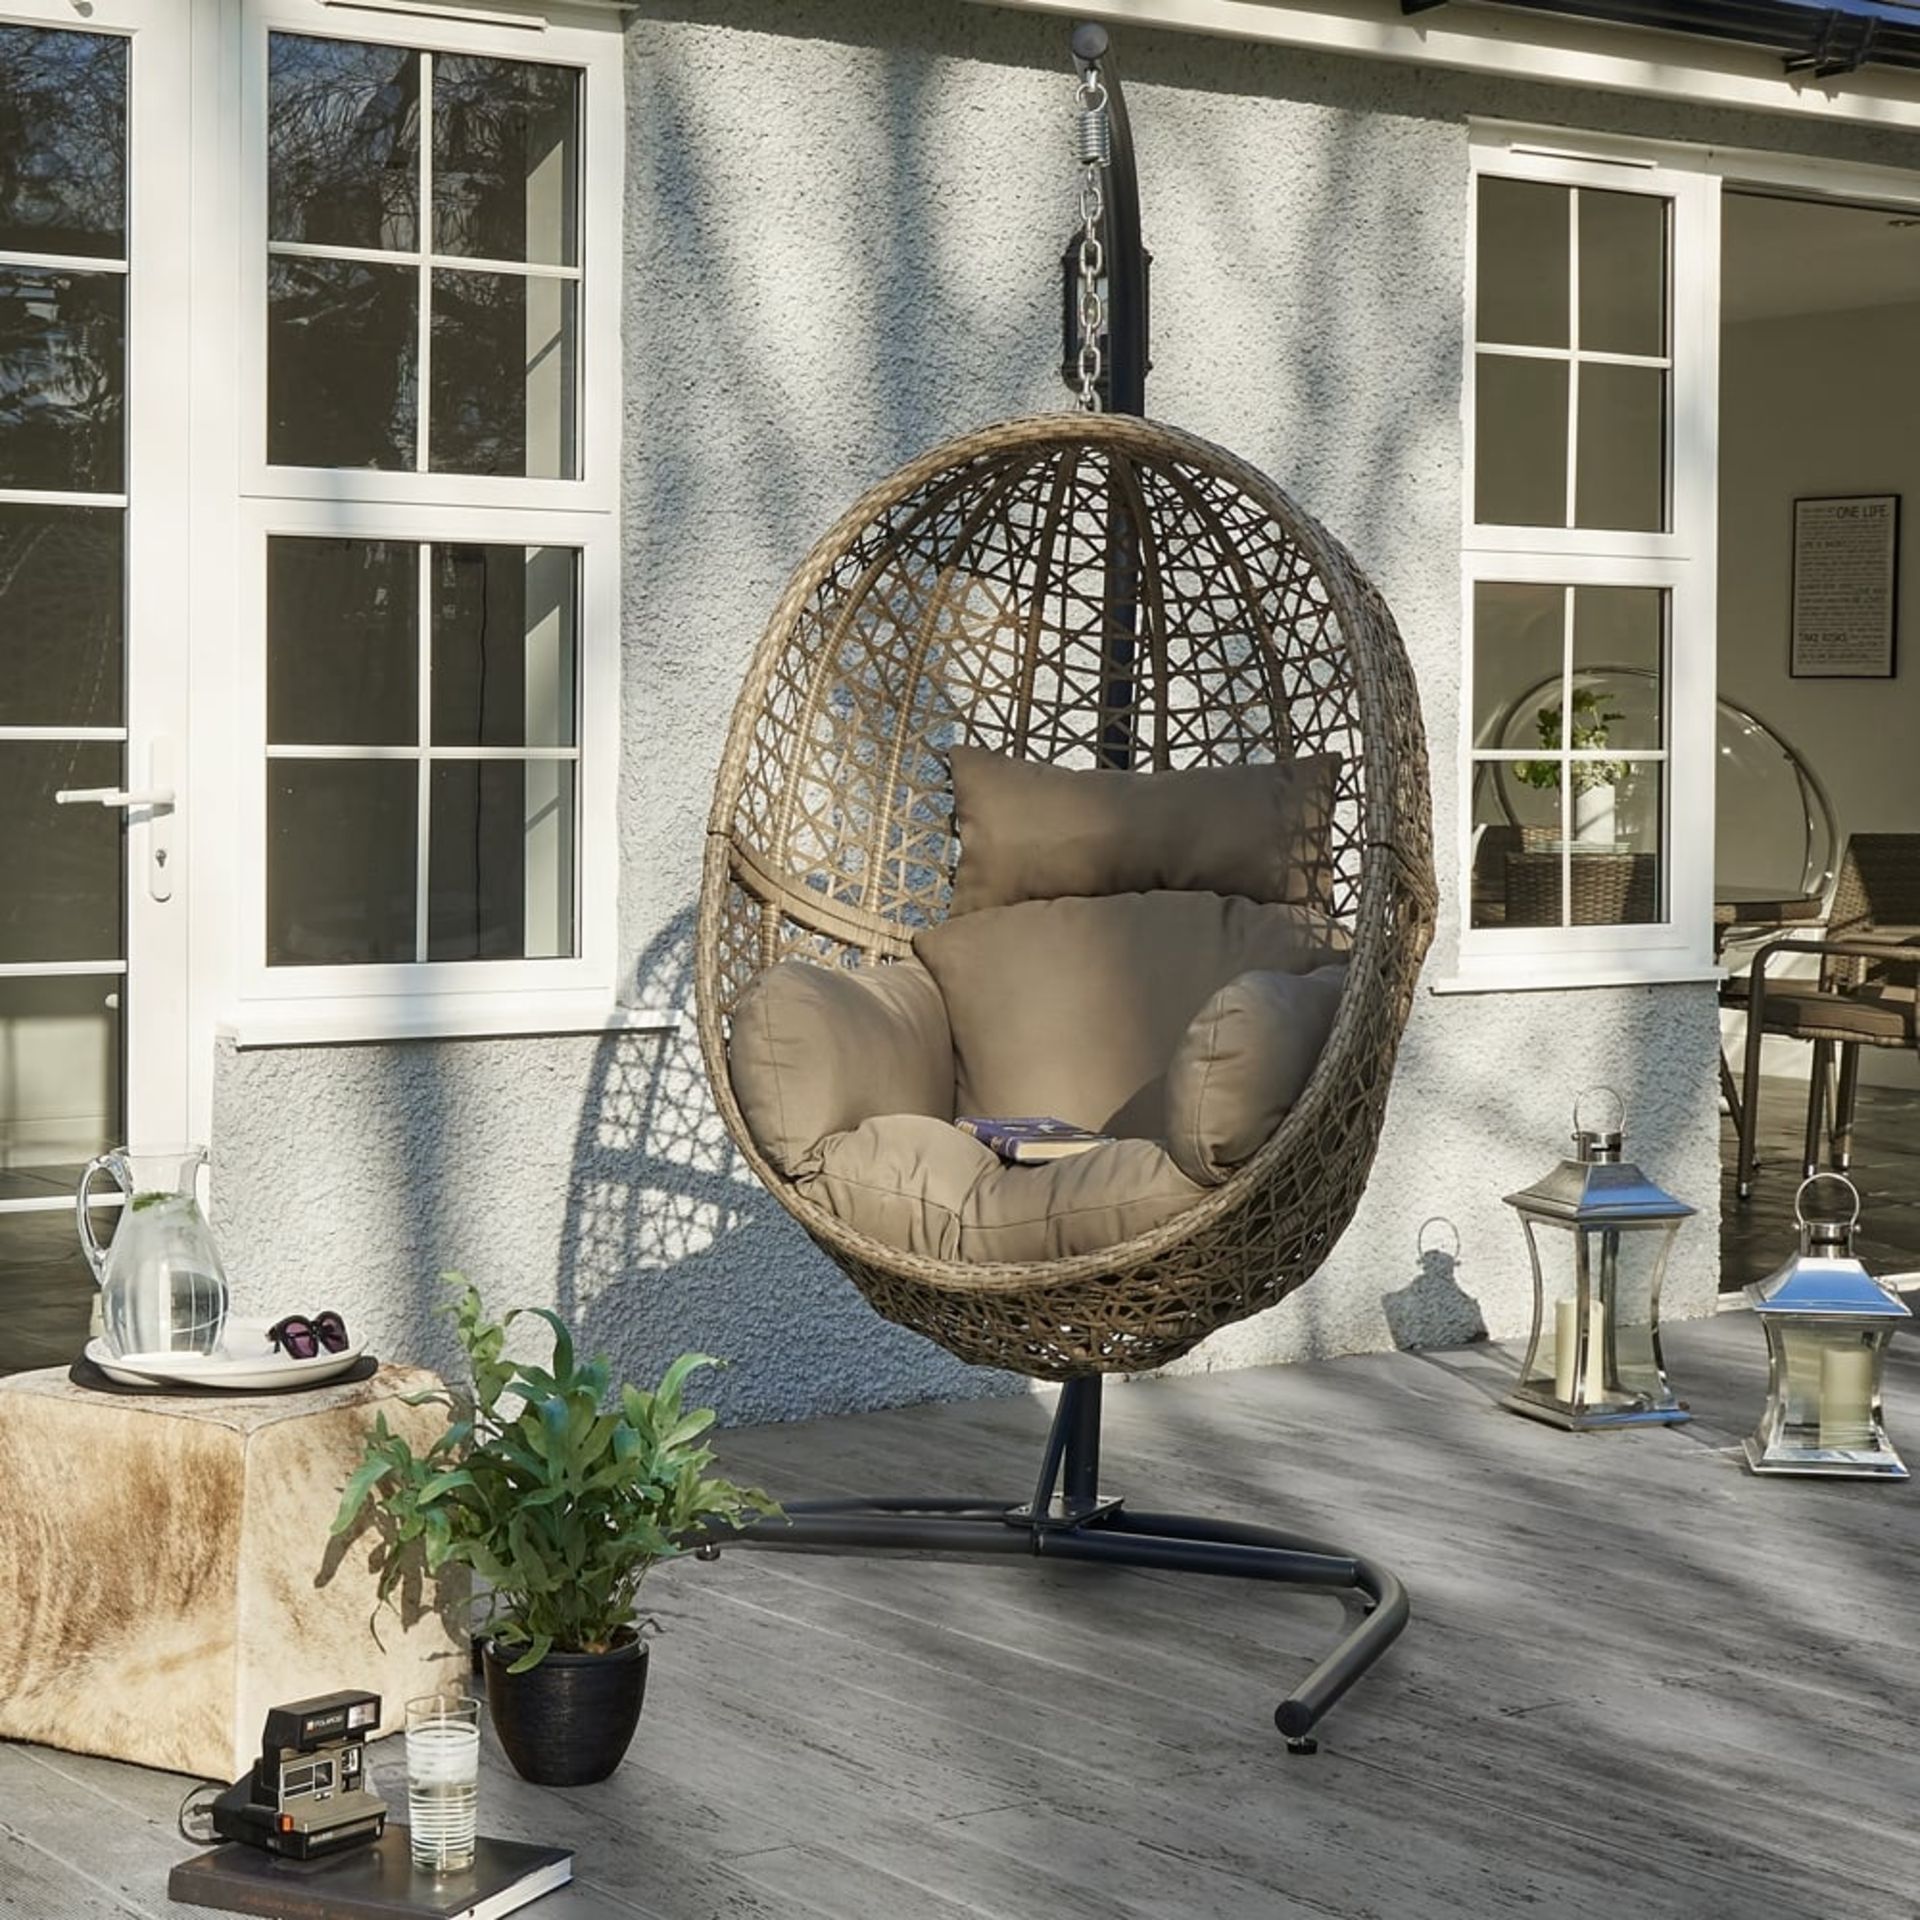 The Hove rattan pod chair with cushions and stand is ideal for whiling away the hours.